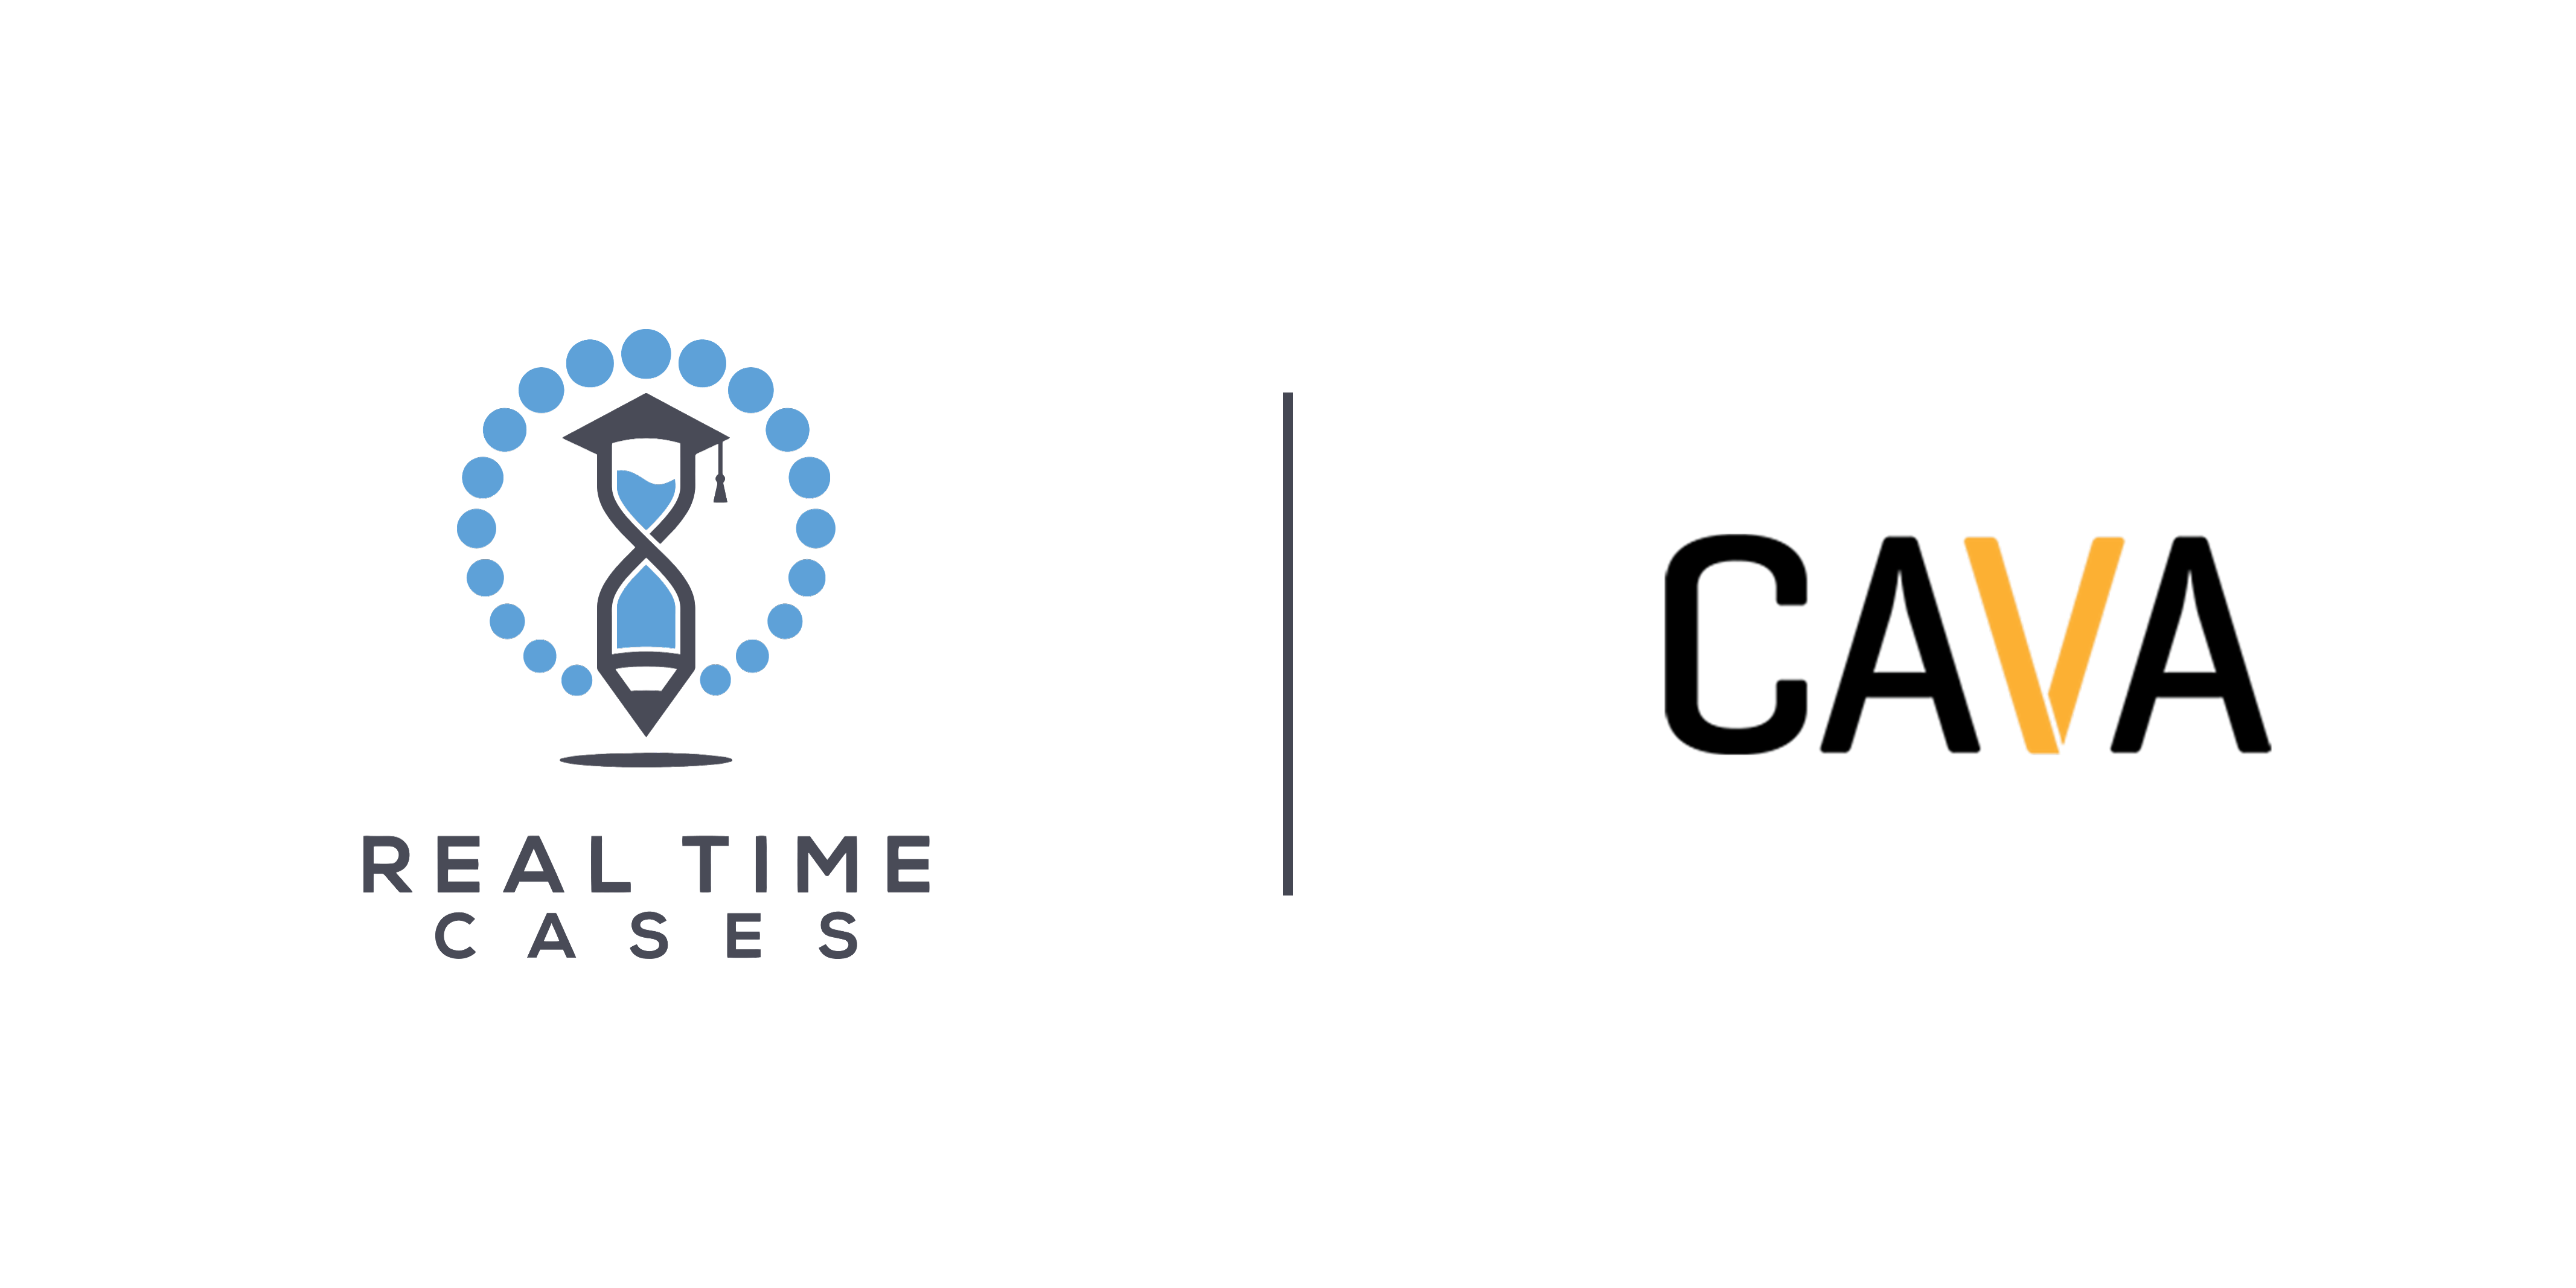 Partnership Announcement - Real Time Cases and Cava